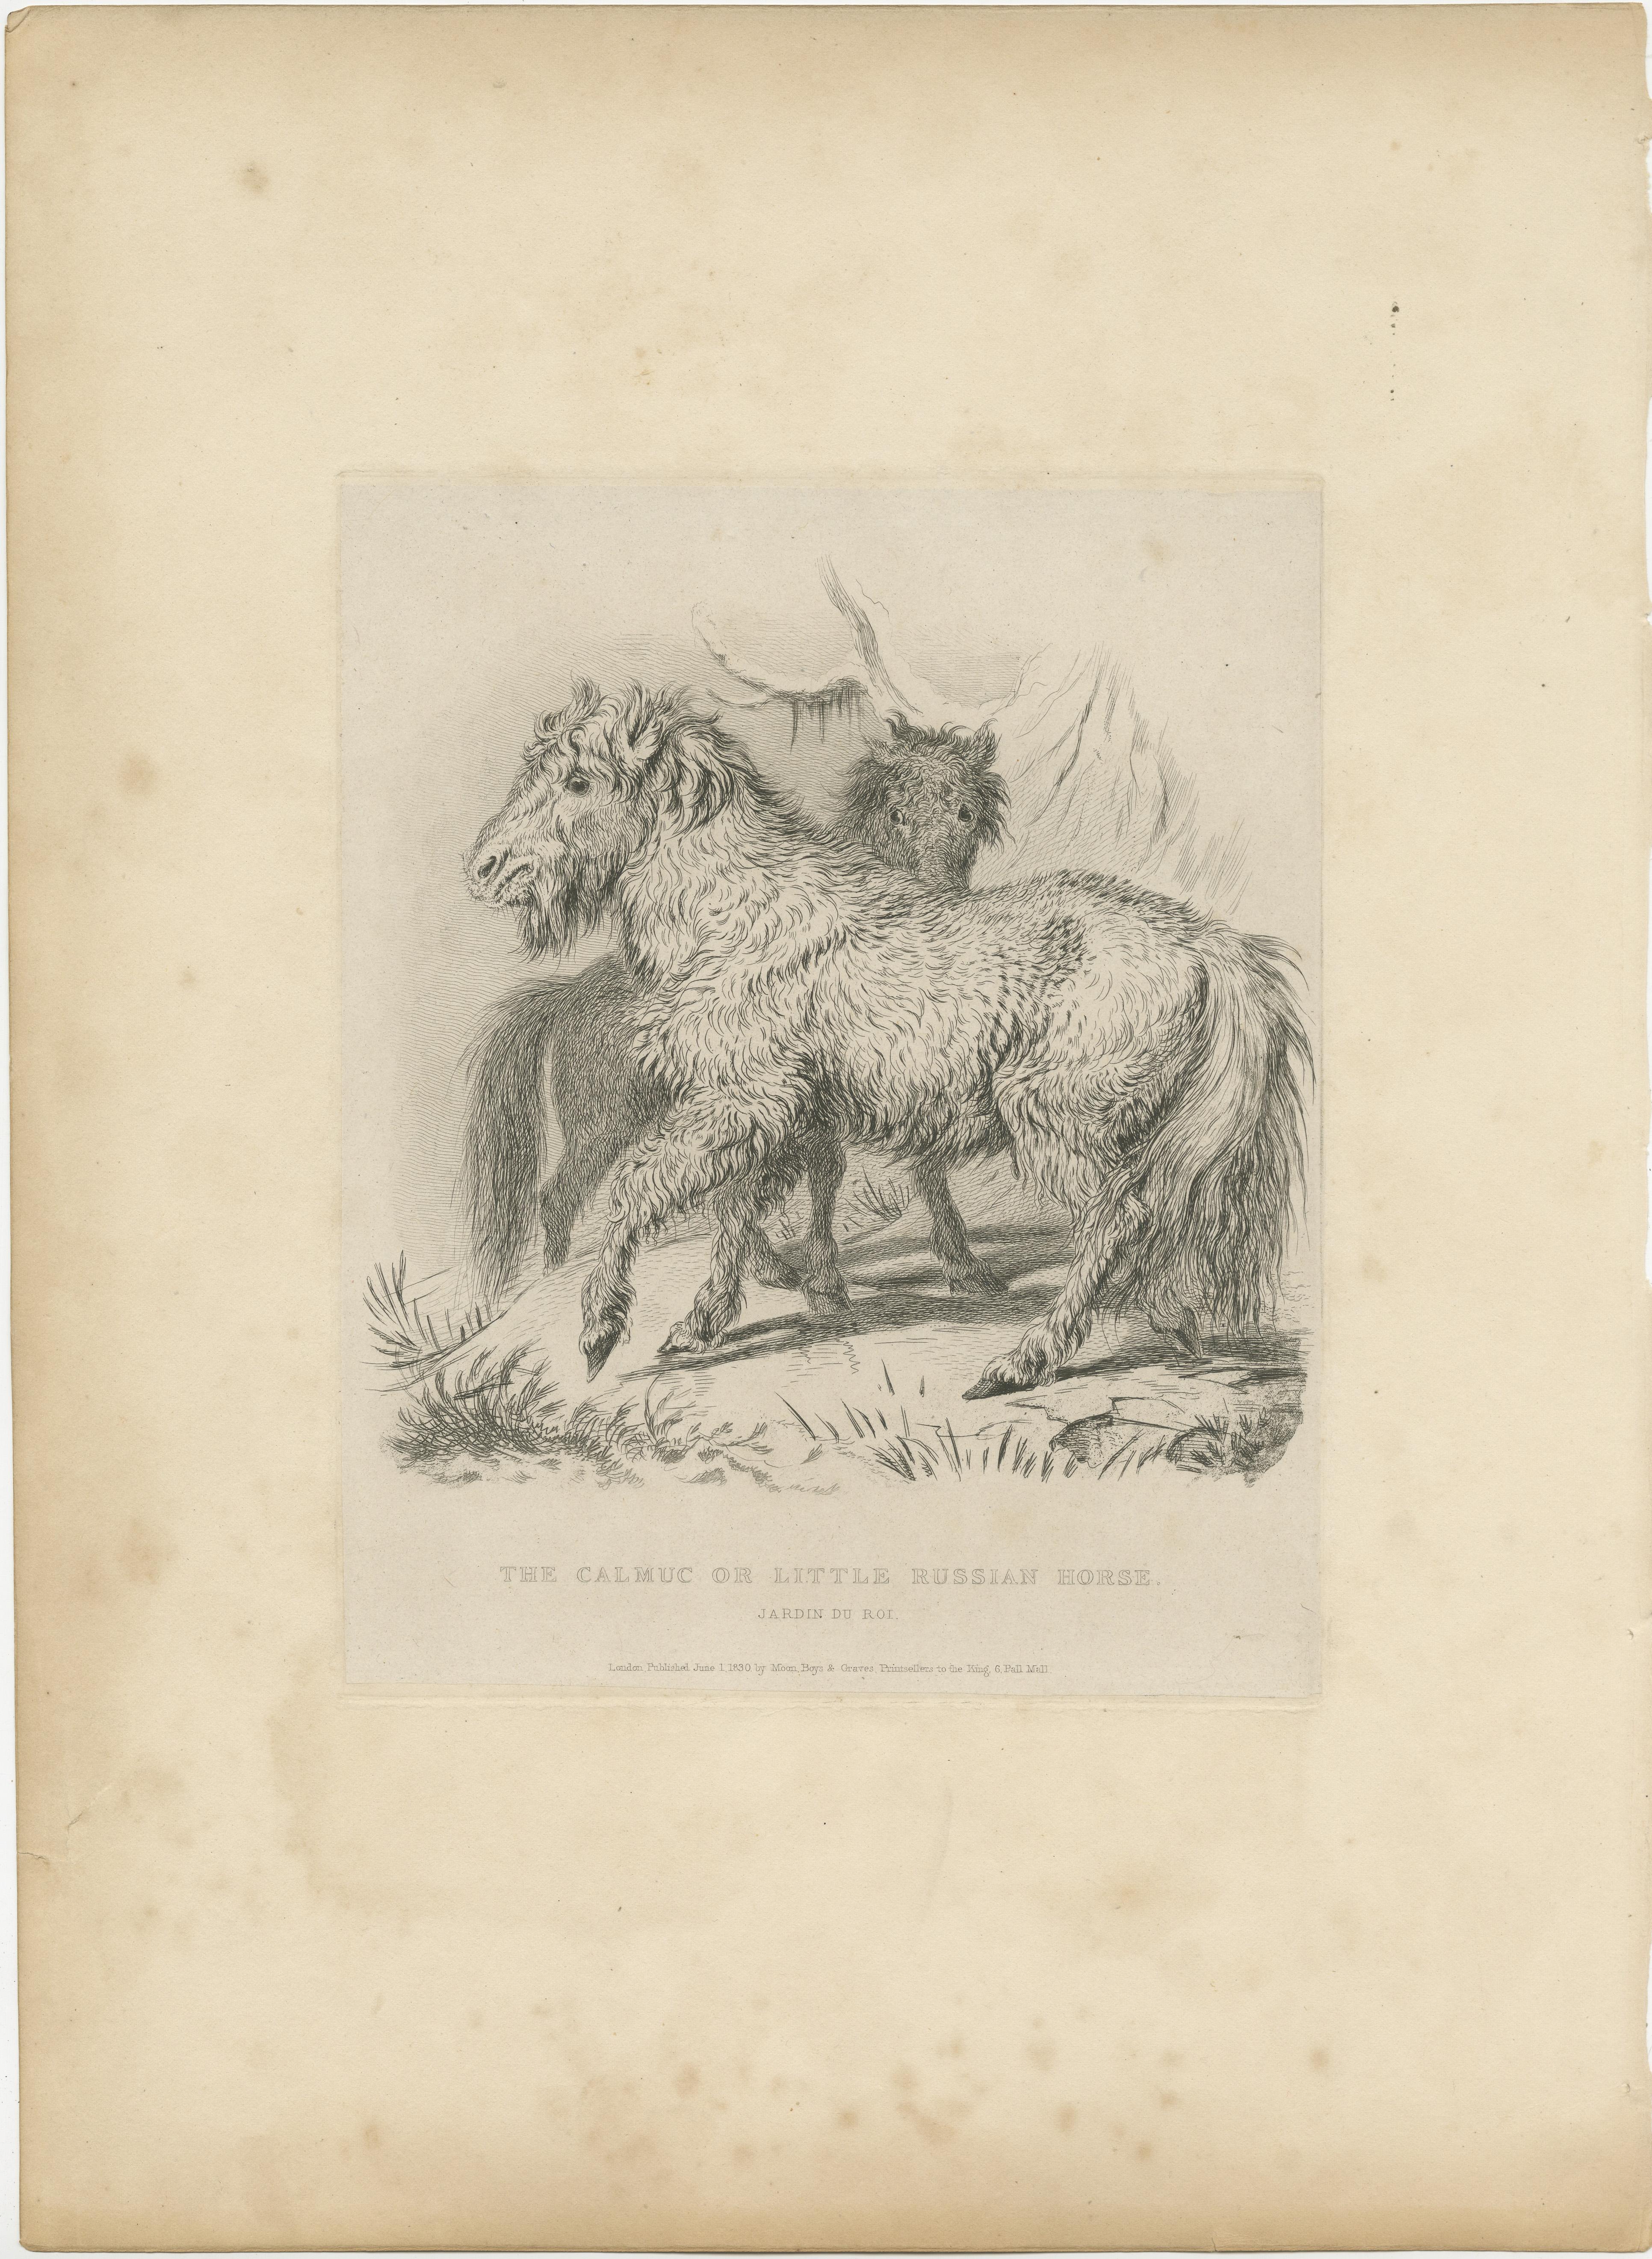 Antique print titled 'The Calmuc or Little Russian Horse'. Original old print of a calmuc or little Russian horse. This print originates from the series 'Characteristic sketches of animals, principally from the Zoological Gardens, Regent's Park'